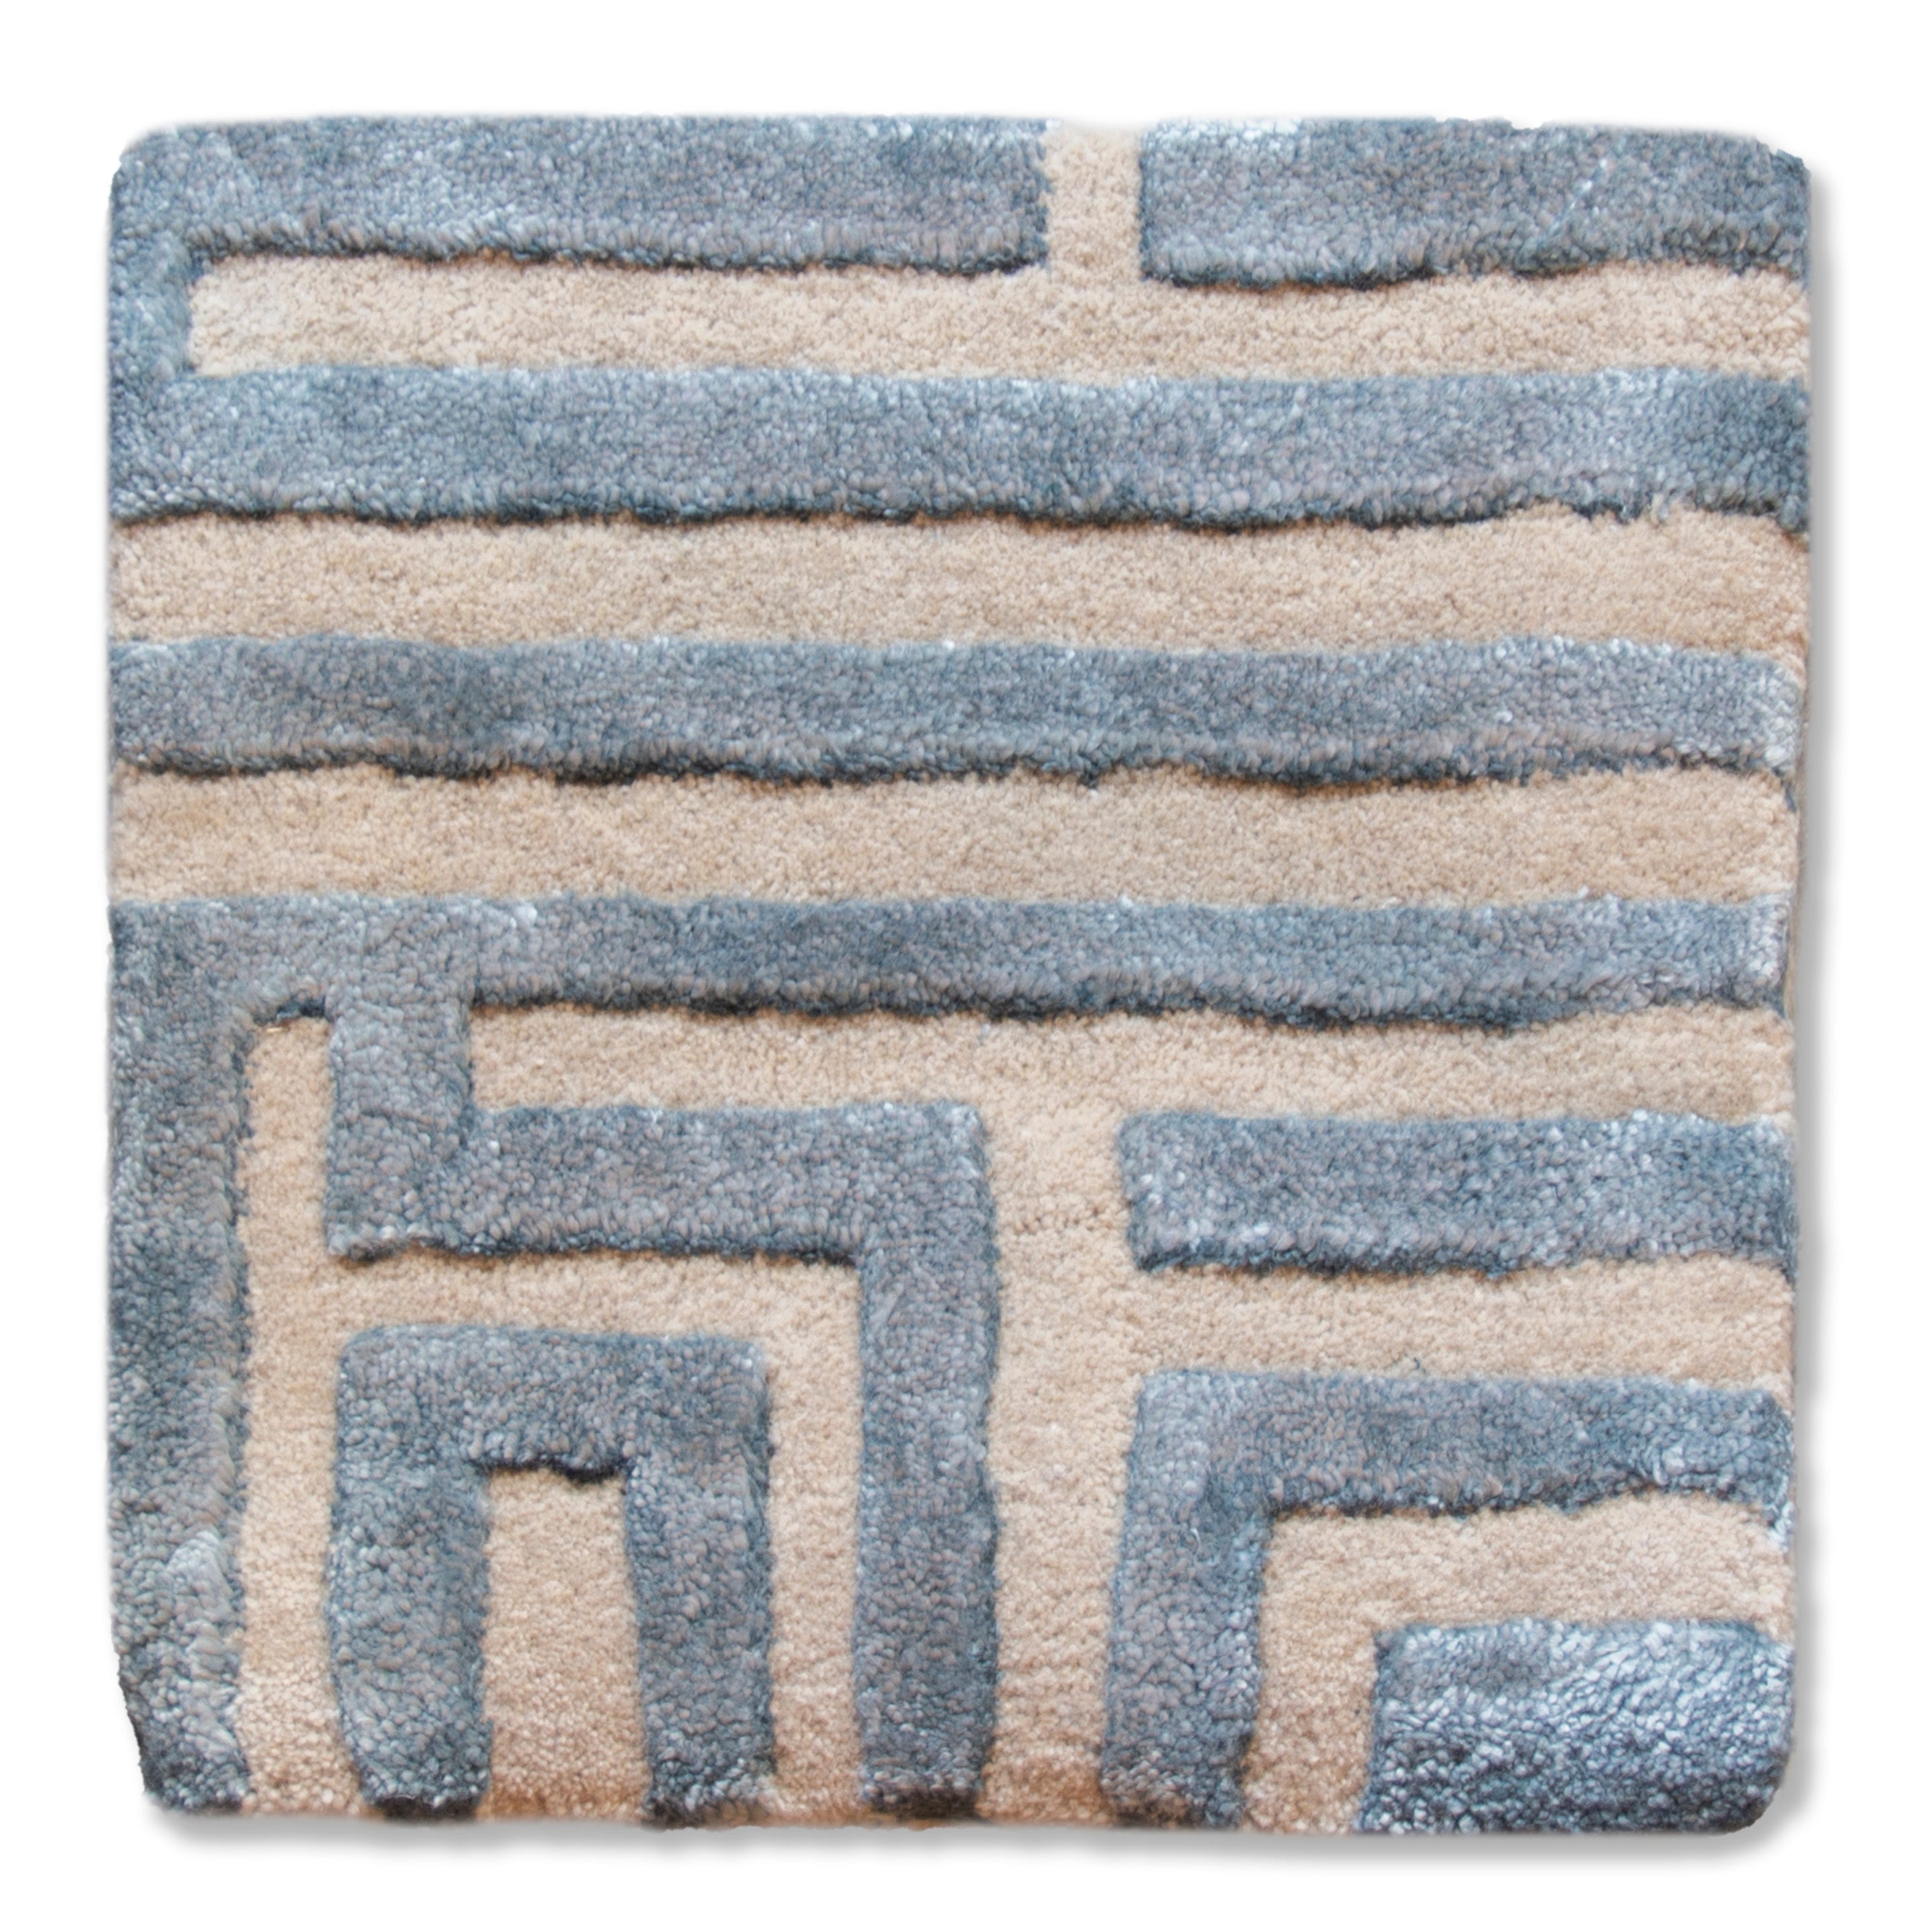 Labyrinth Collection Maze Rug Sample (12x12 in.)